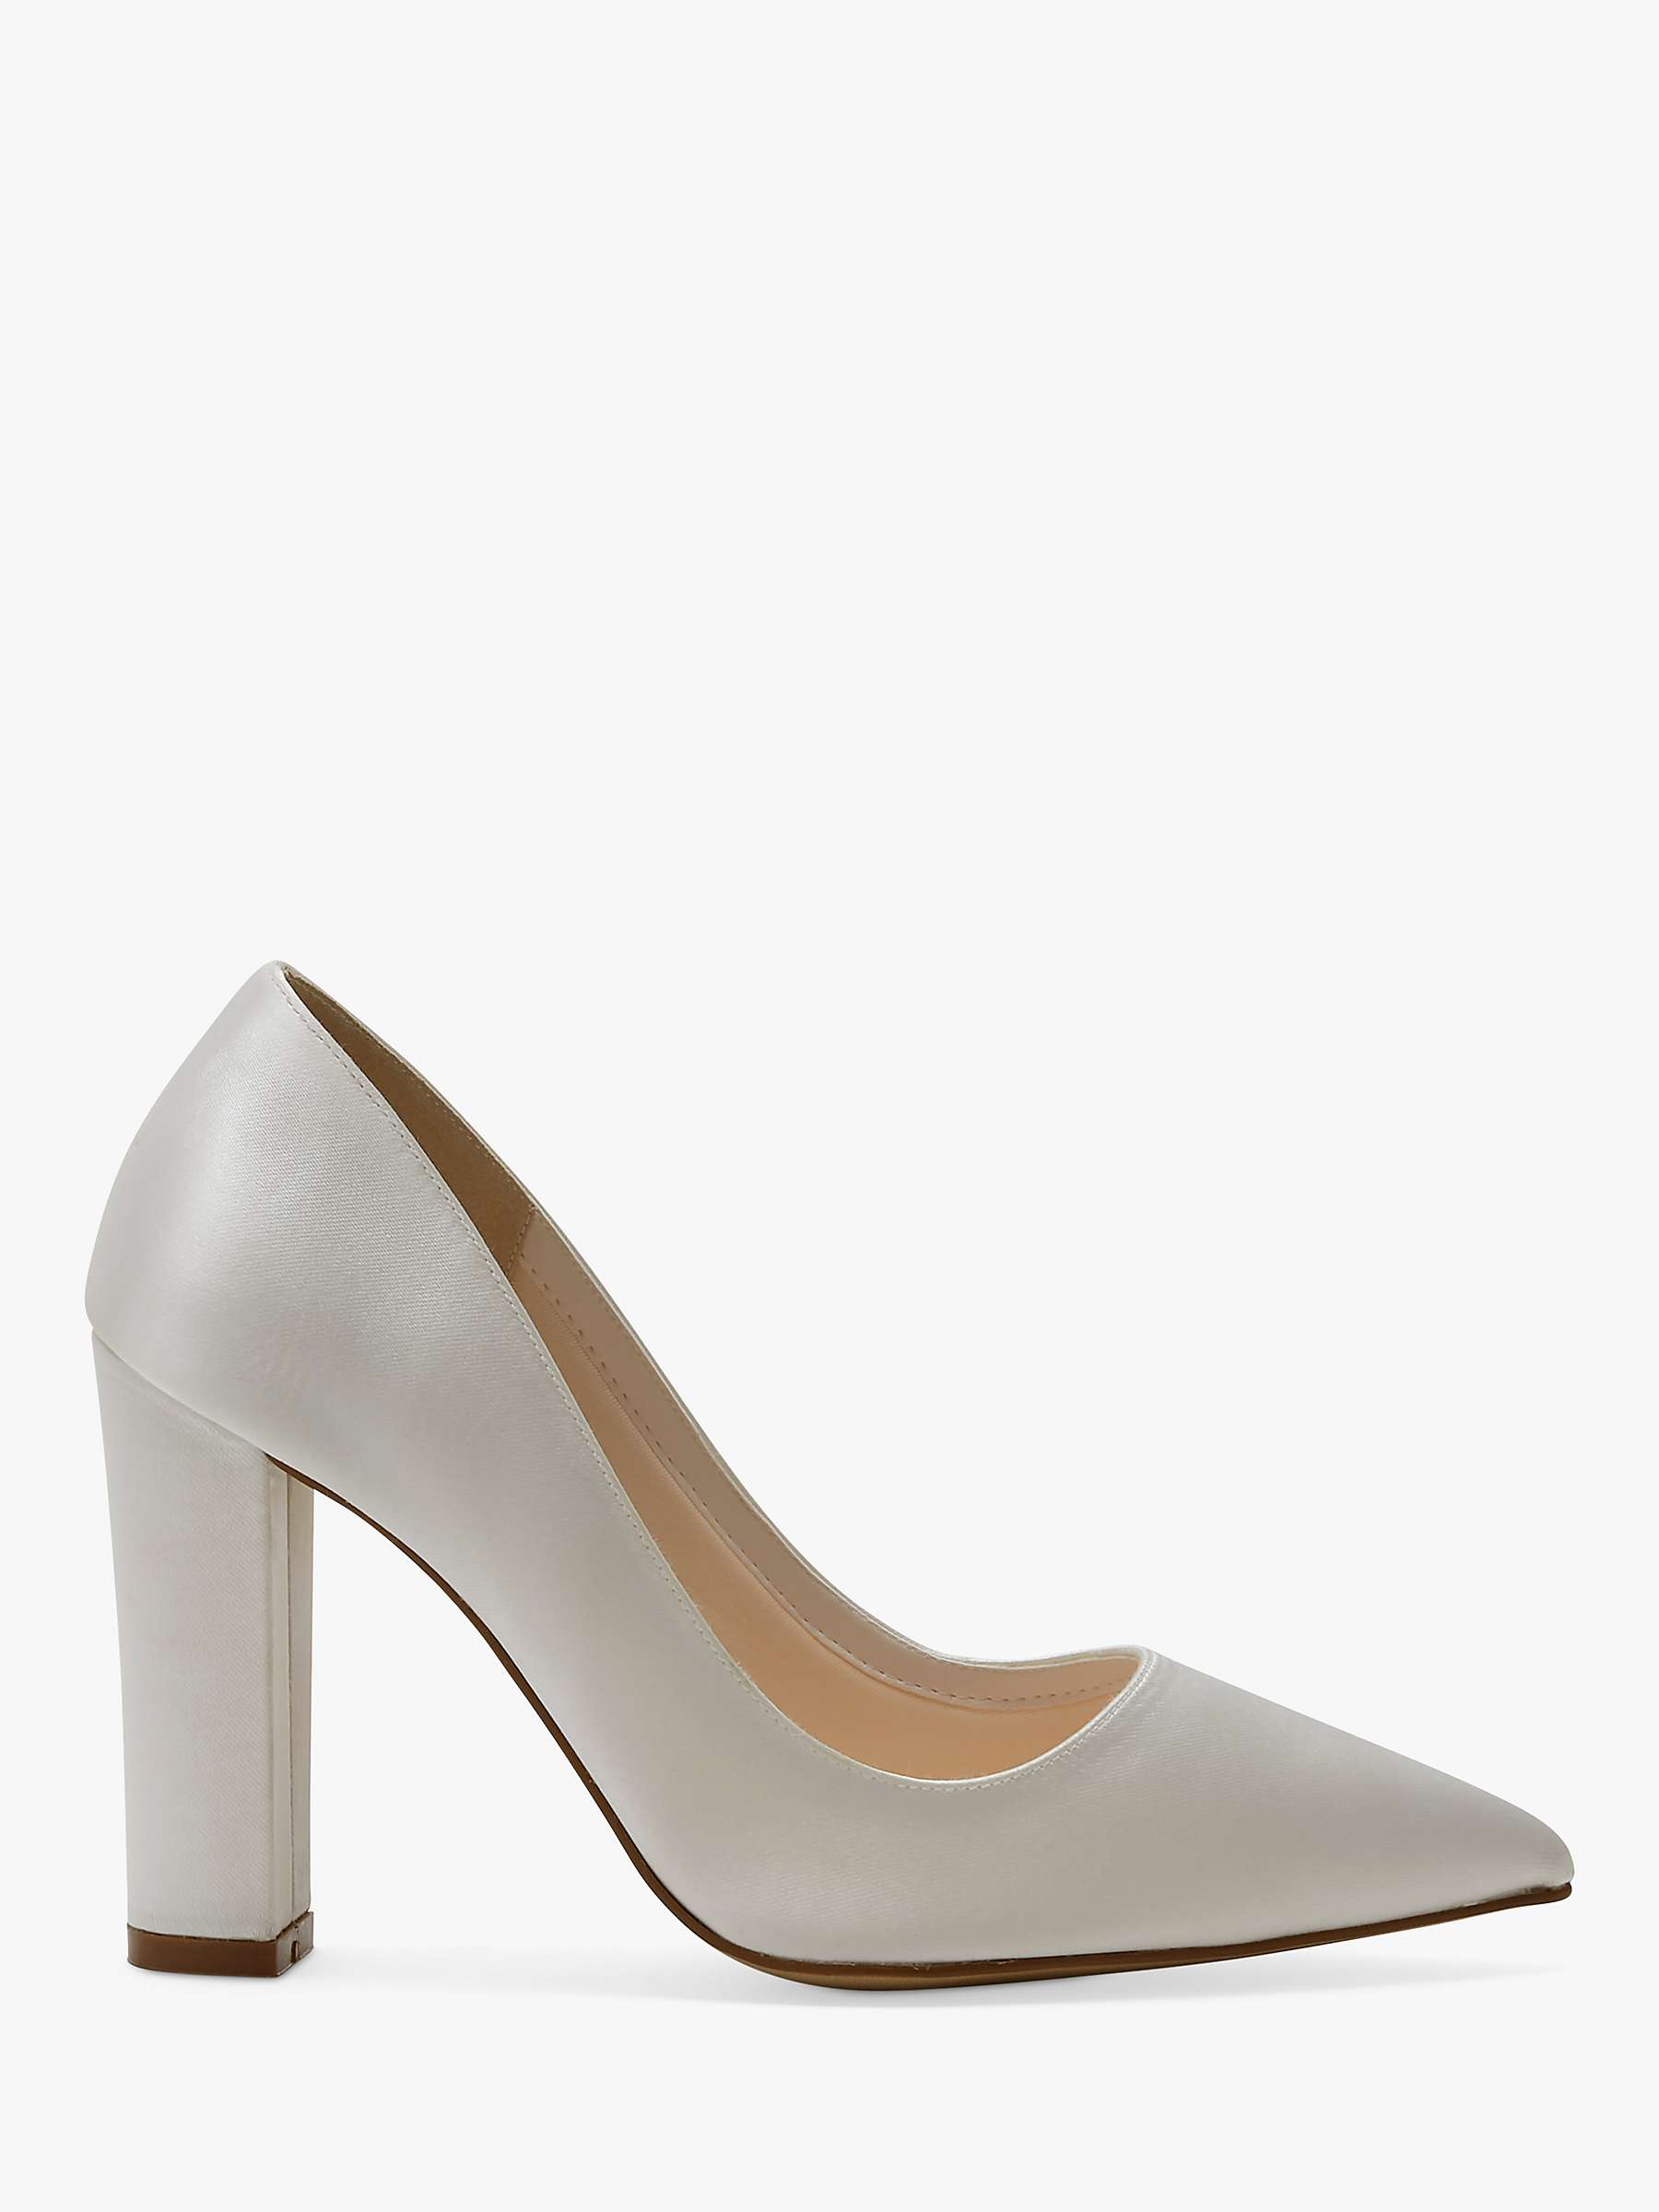 Buy Rainbow Club Remi Wide Fit Wedding Court Shoes, Ivory Satin Online at johnlewis.com